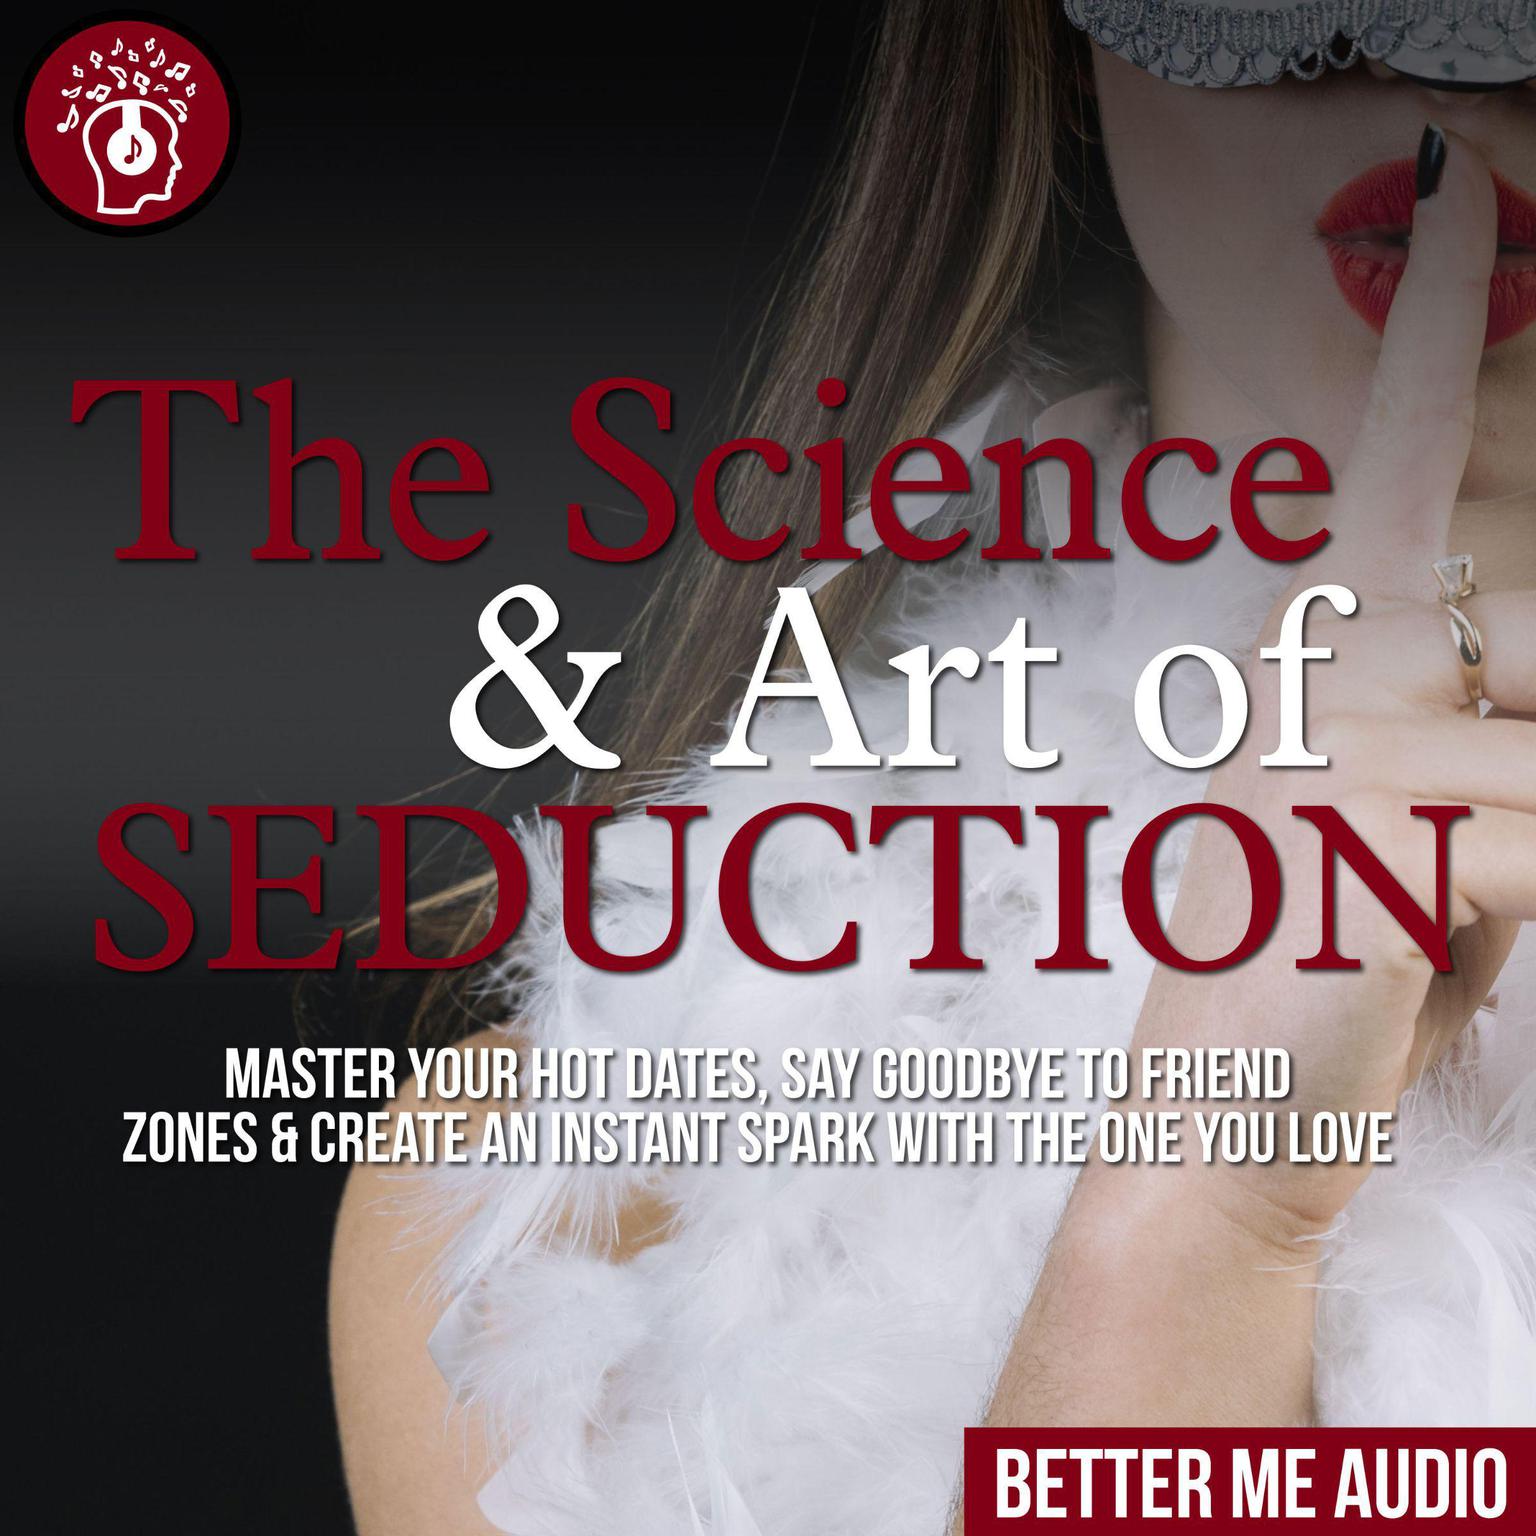 The Science & Art of Seduction: Master Your Hot Dates, Say Goodbye to Friend Zones & Create An Instant Spark With The One You Love Audiobook, by Better Me Audio